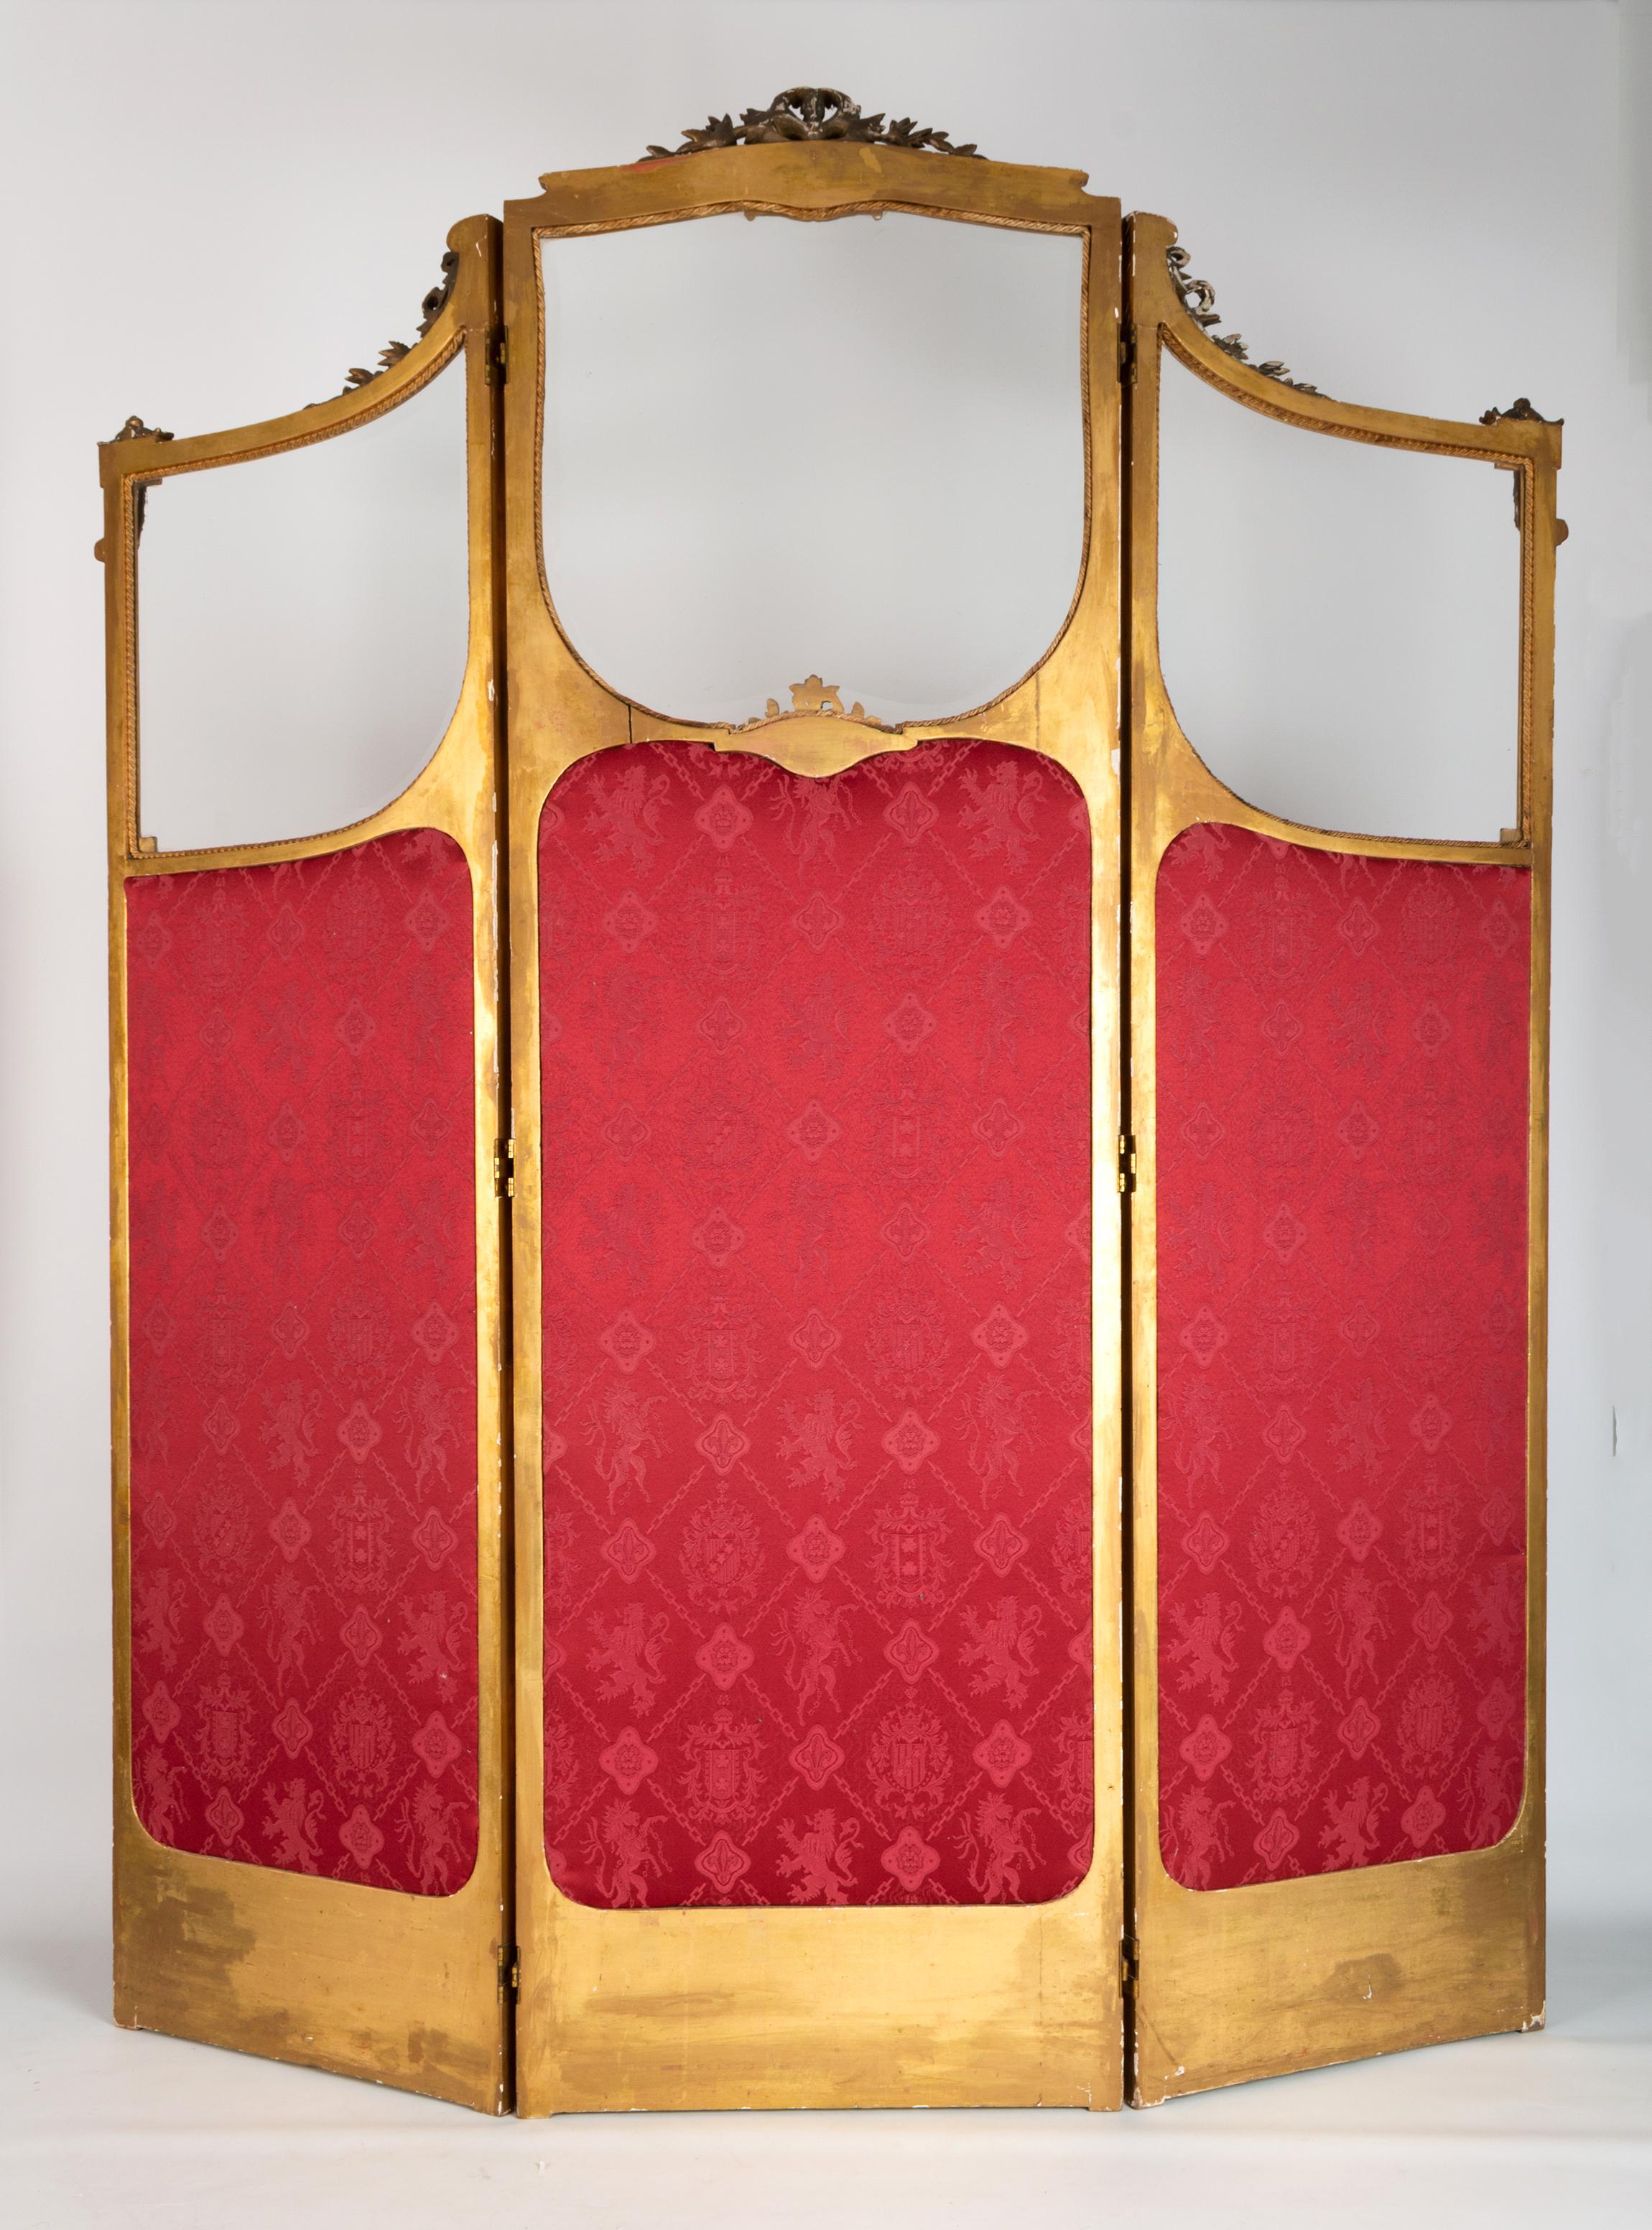 Antique 19th Century French Louis XVI Stye Gilt Three Panel Screen Room Divider For Sale 4